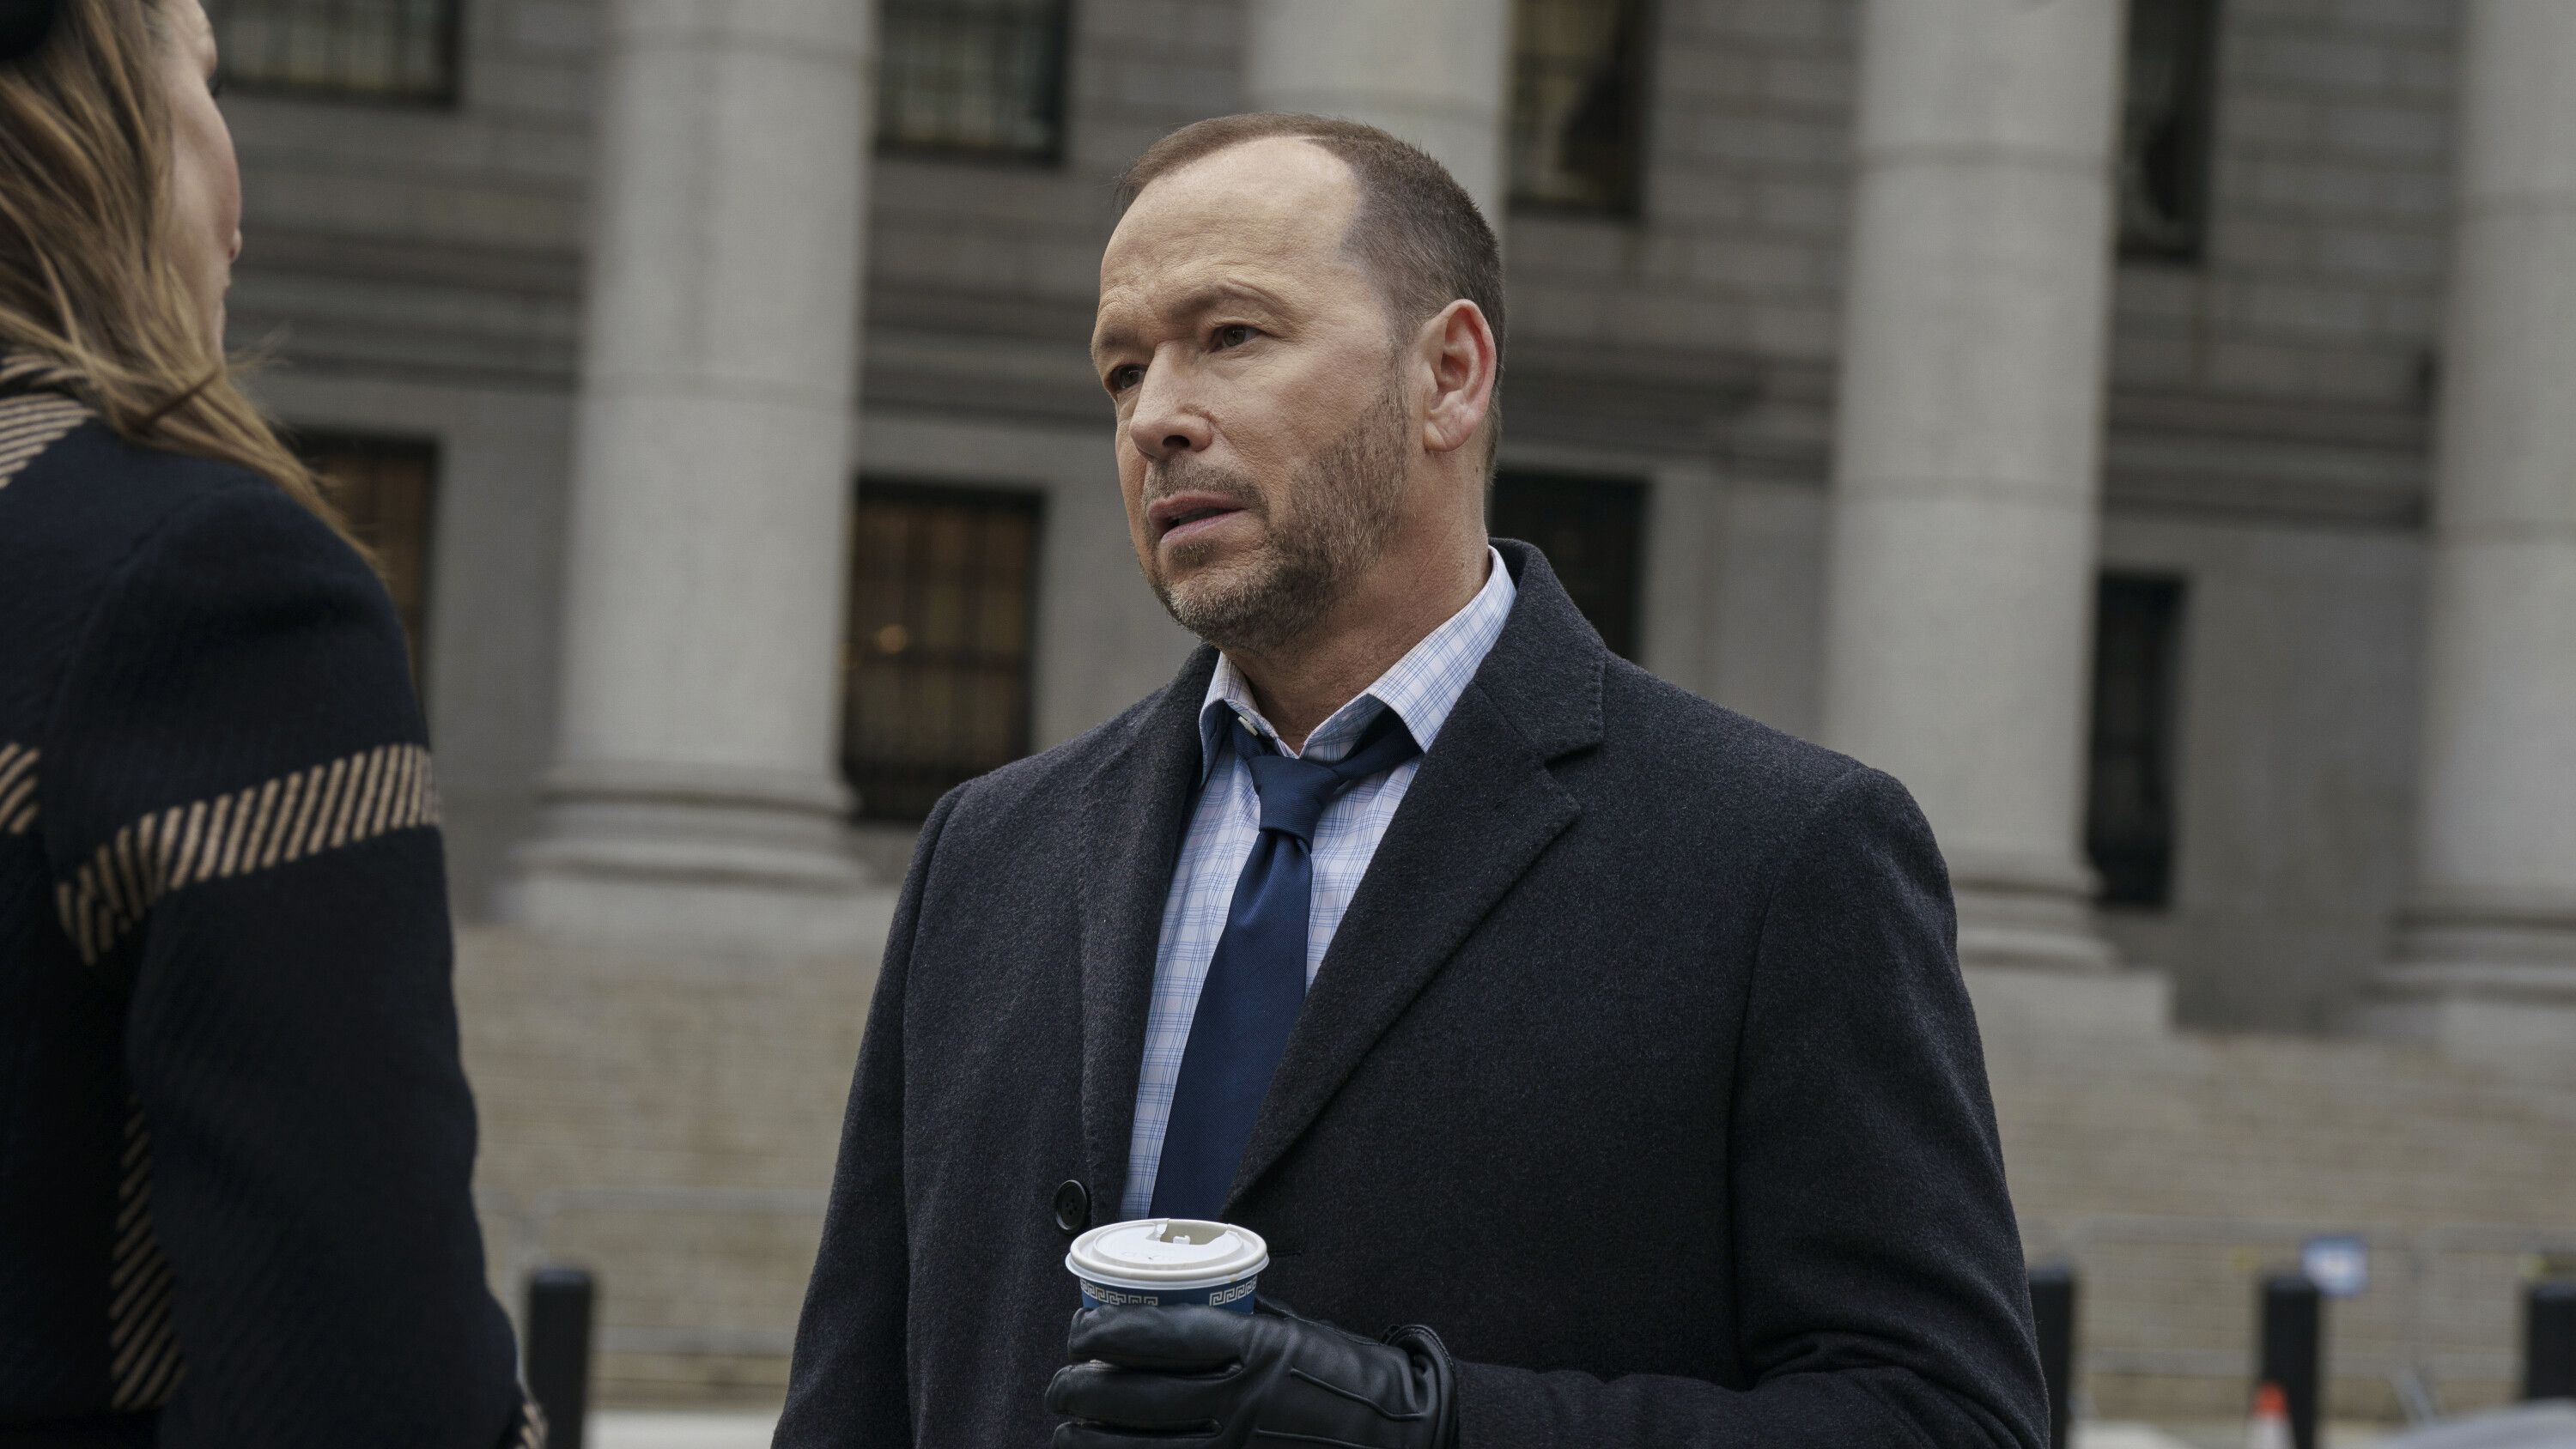 Blue Bloods' to end after 14 seasons